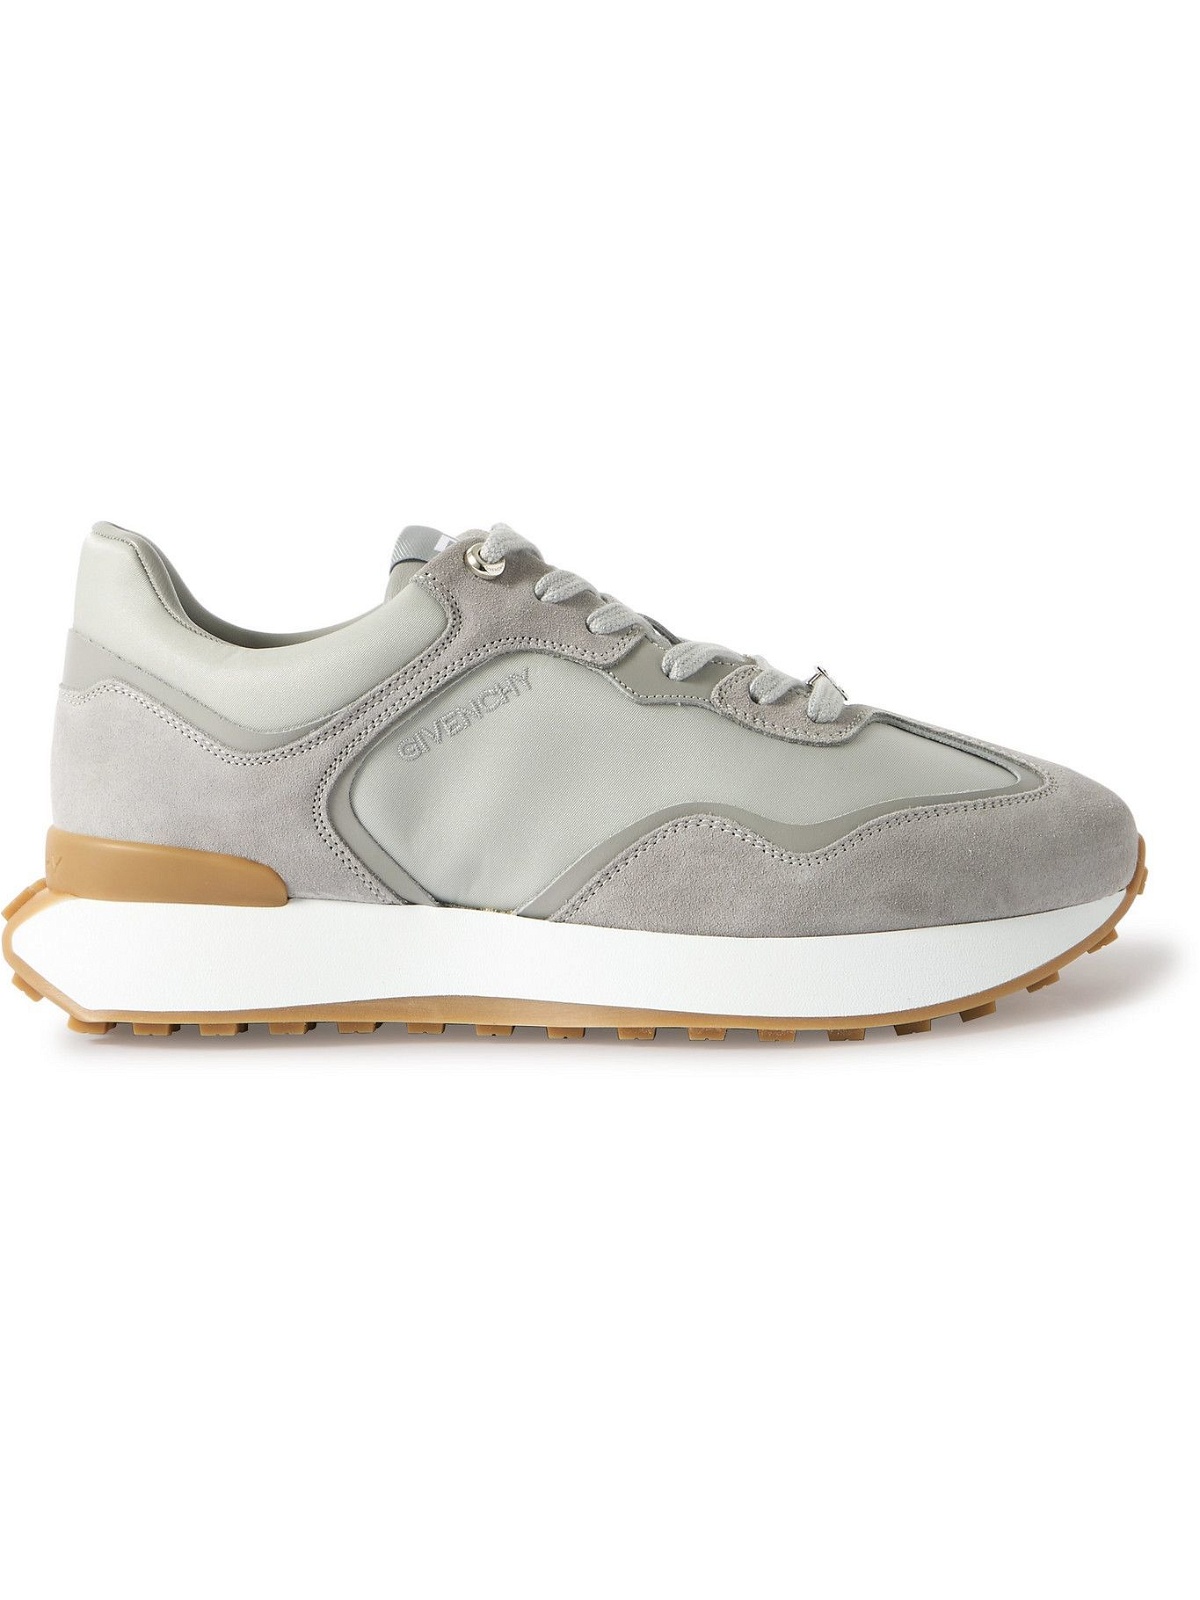 Givenchy - Giv Runner Suede and Leather-Trimmed Nylon Sneakers - Gray ...